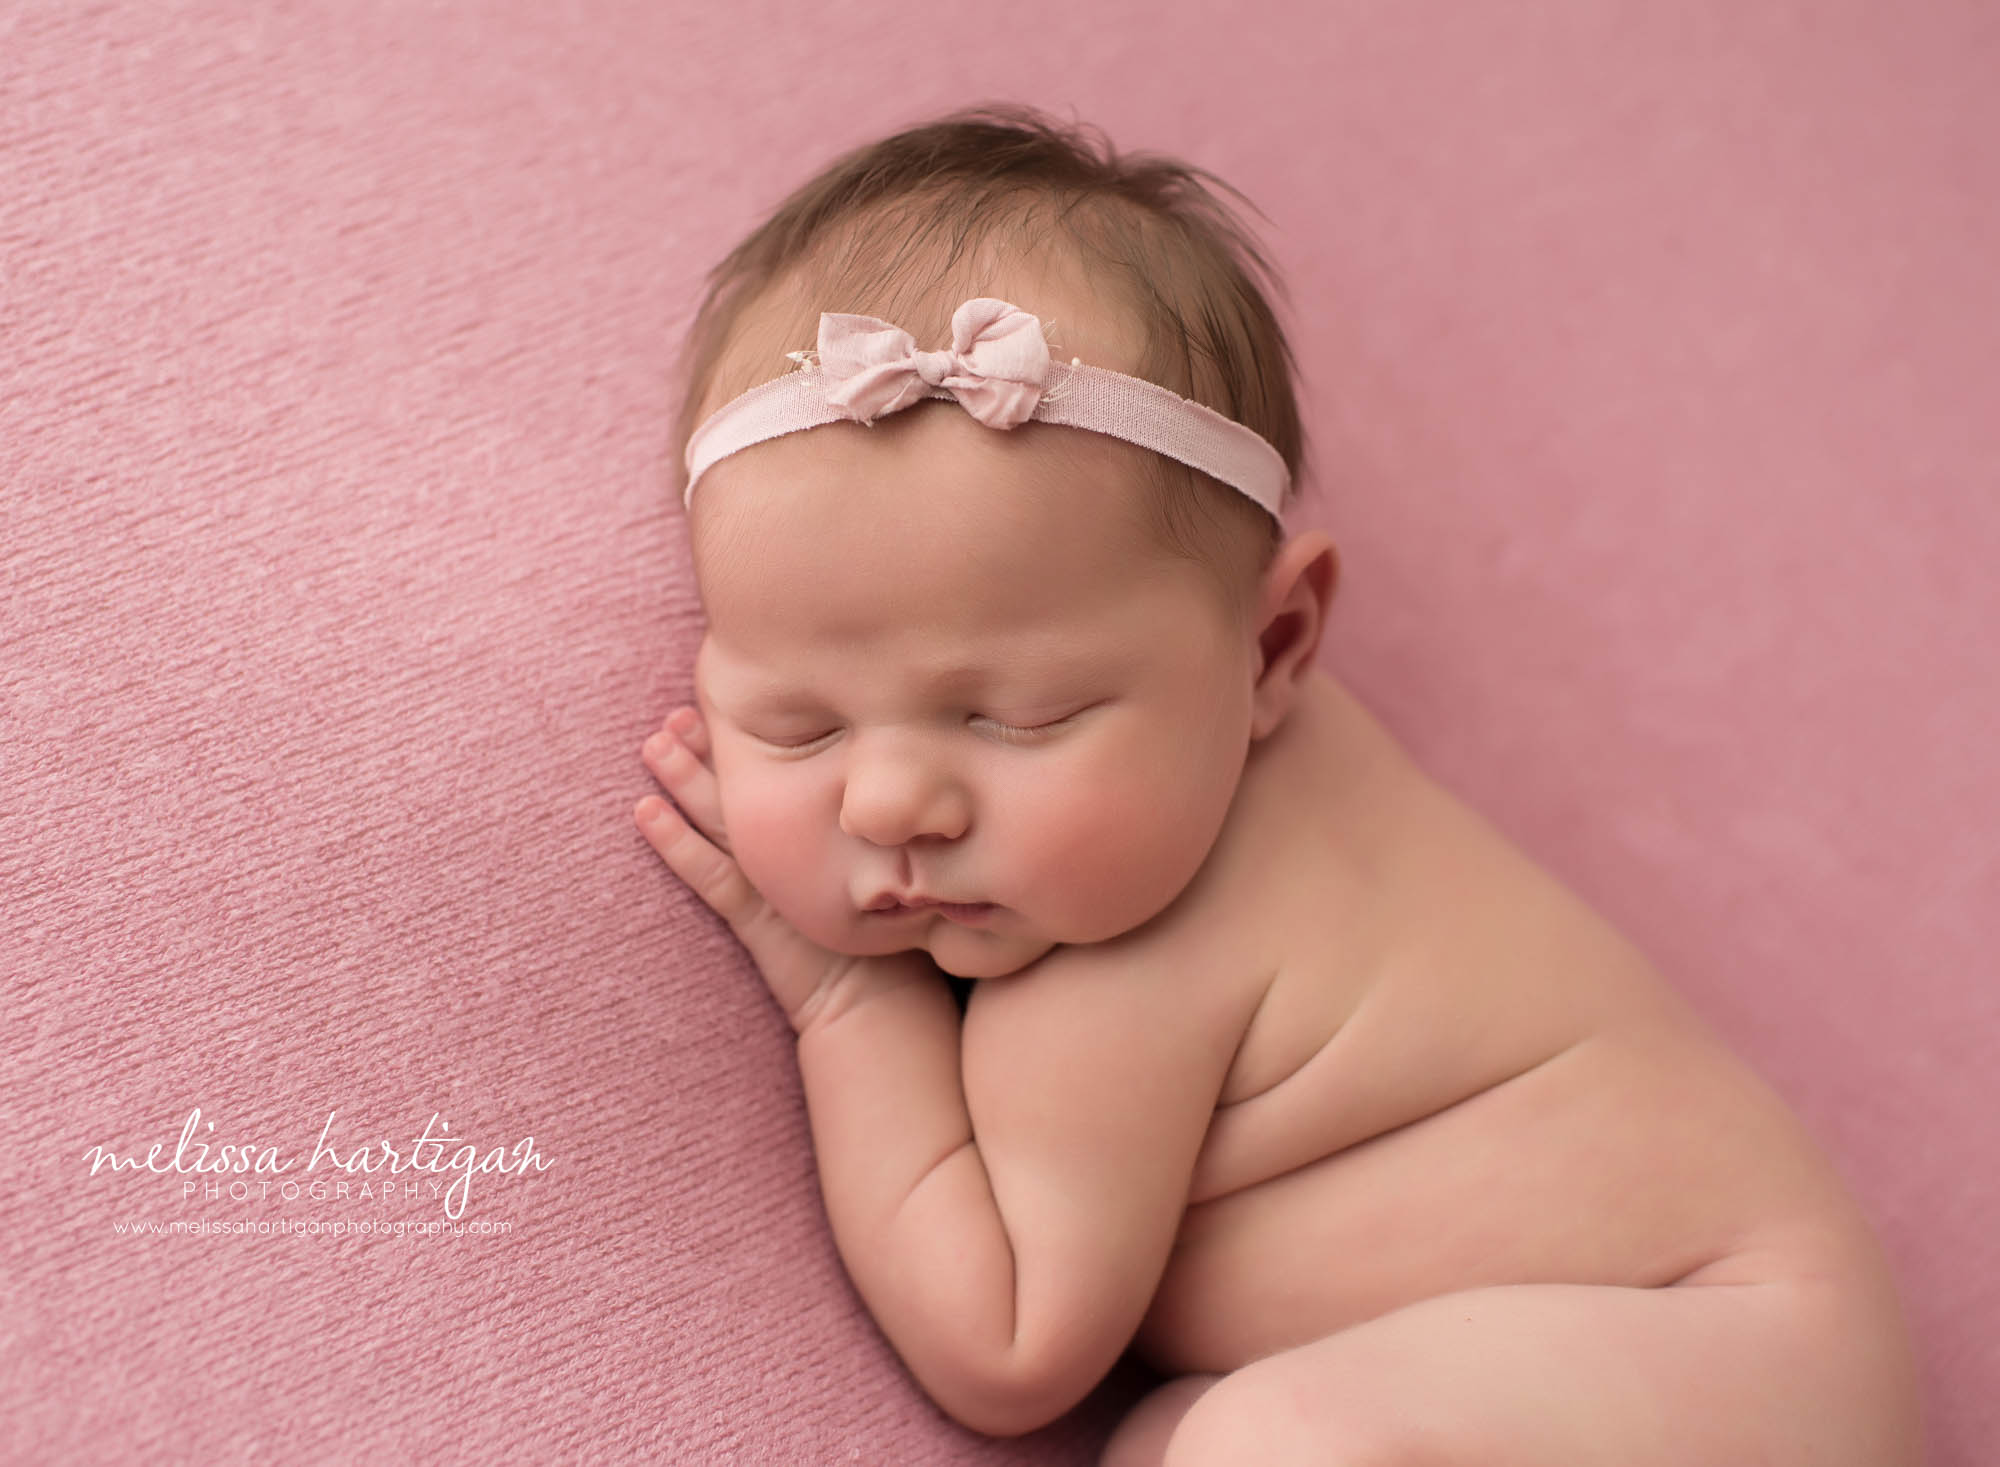 wborn baby girl posed on pink backdrop with hand under cheek wearing pink bow headband